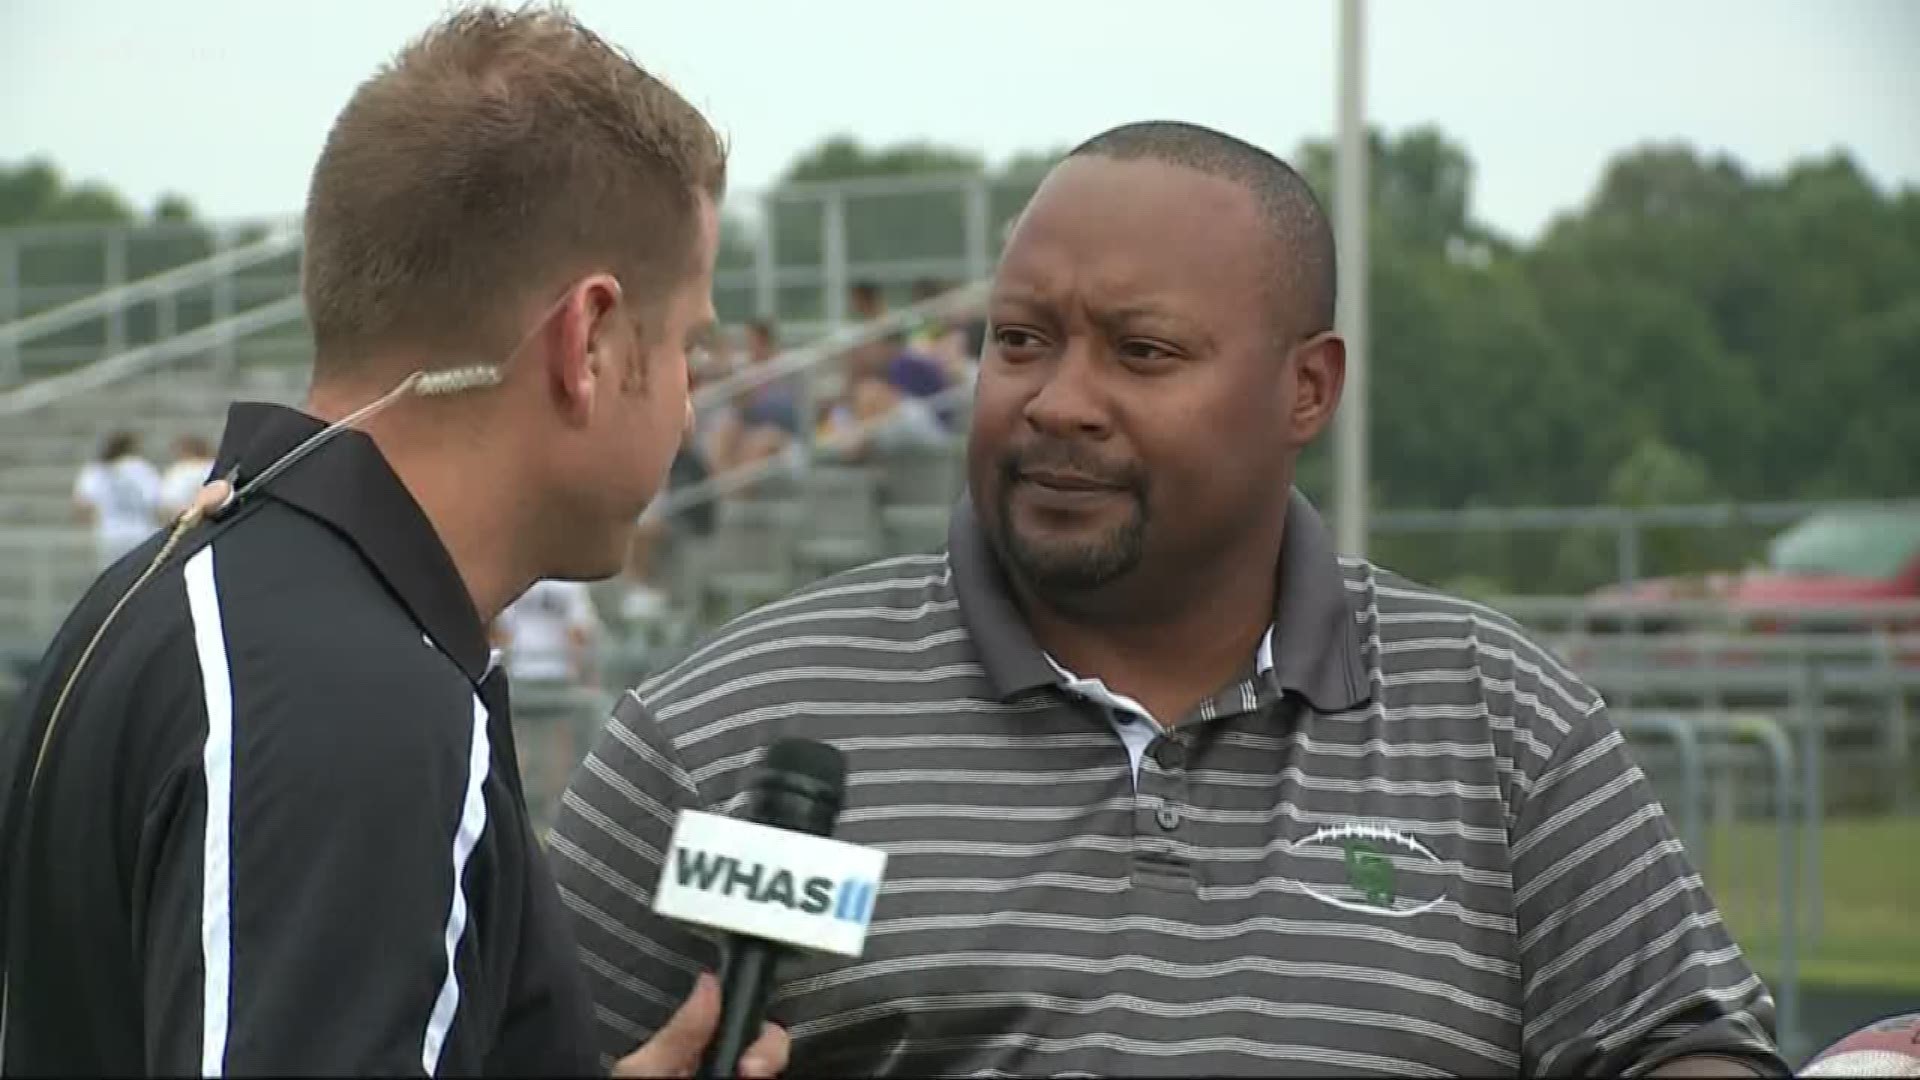 Kent talks with South Oldham football coach at HS GameTime